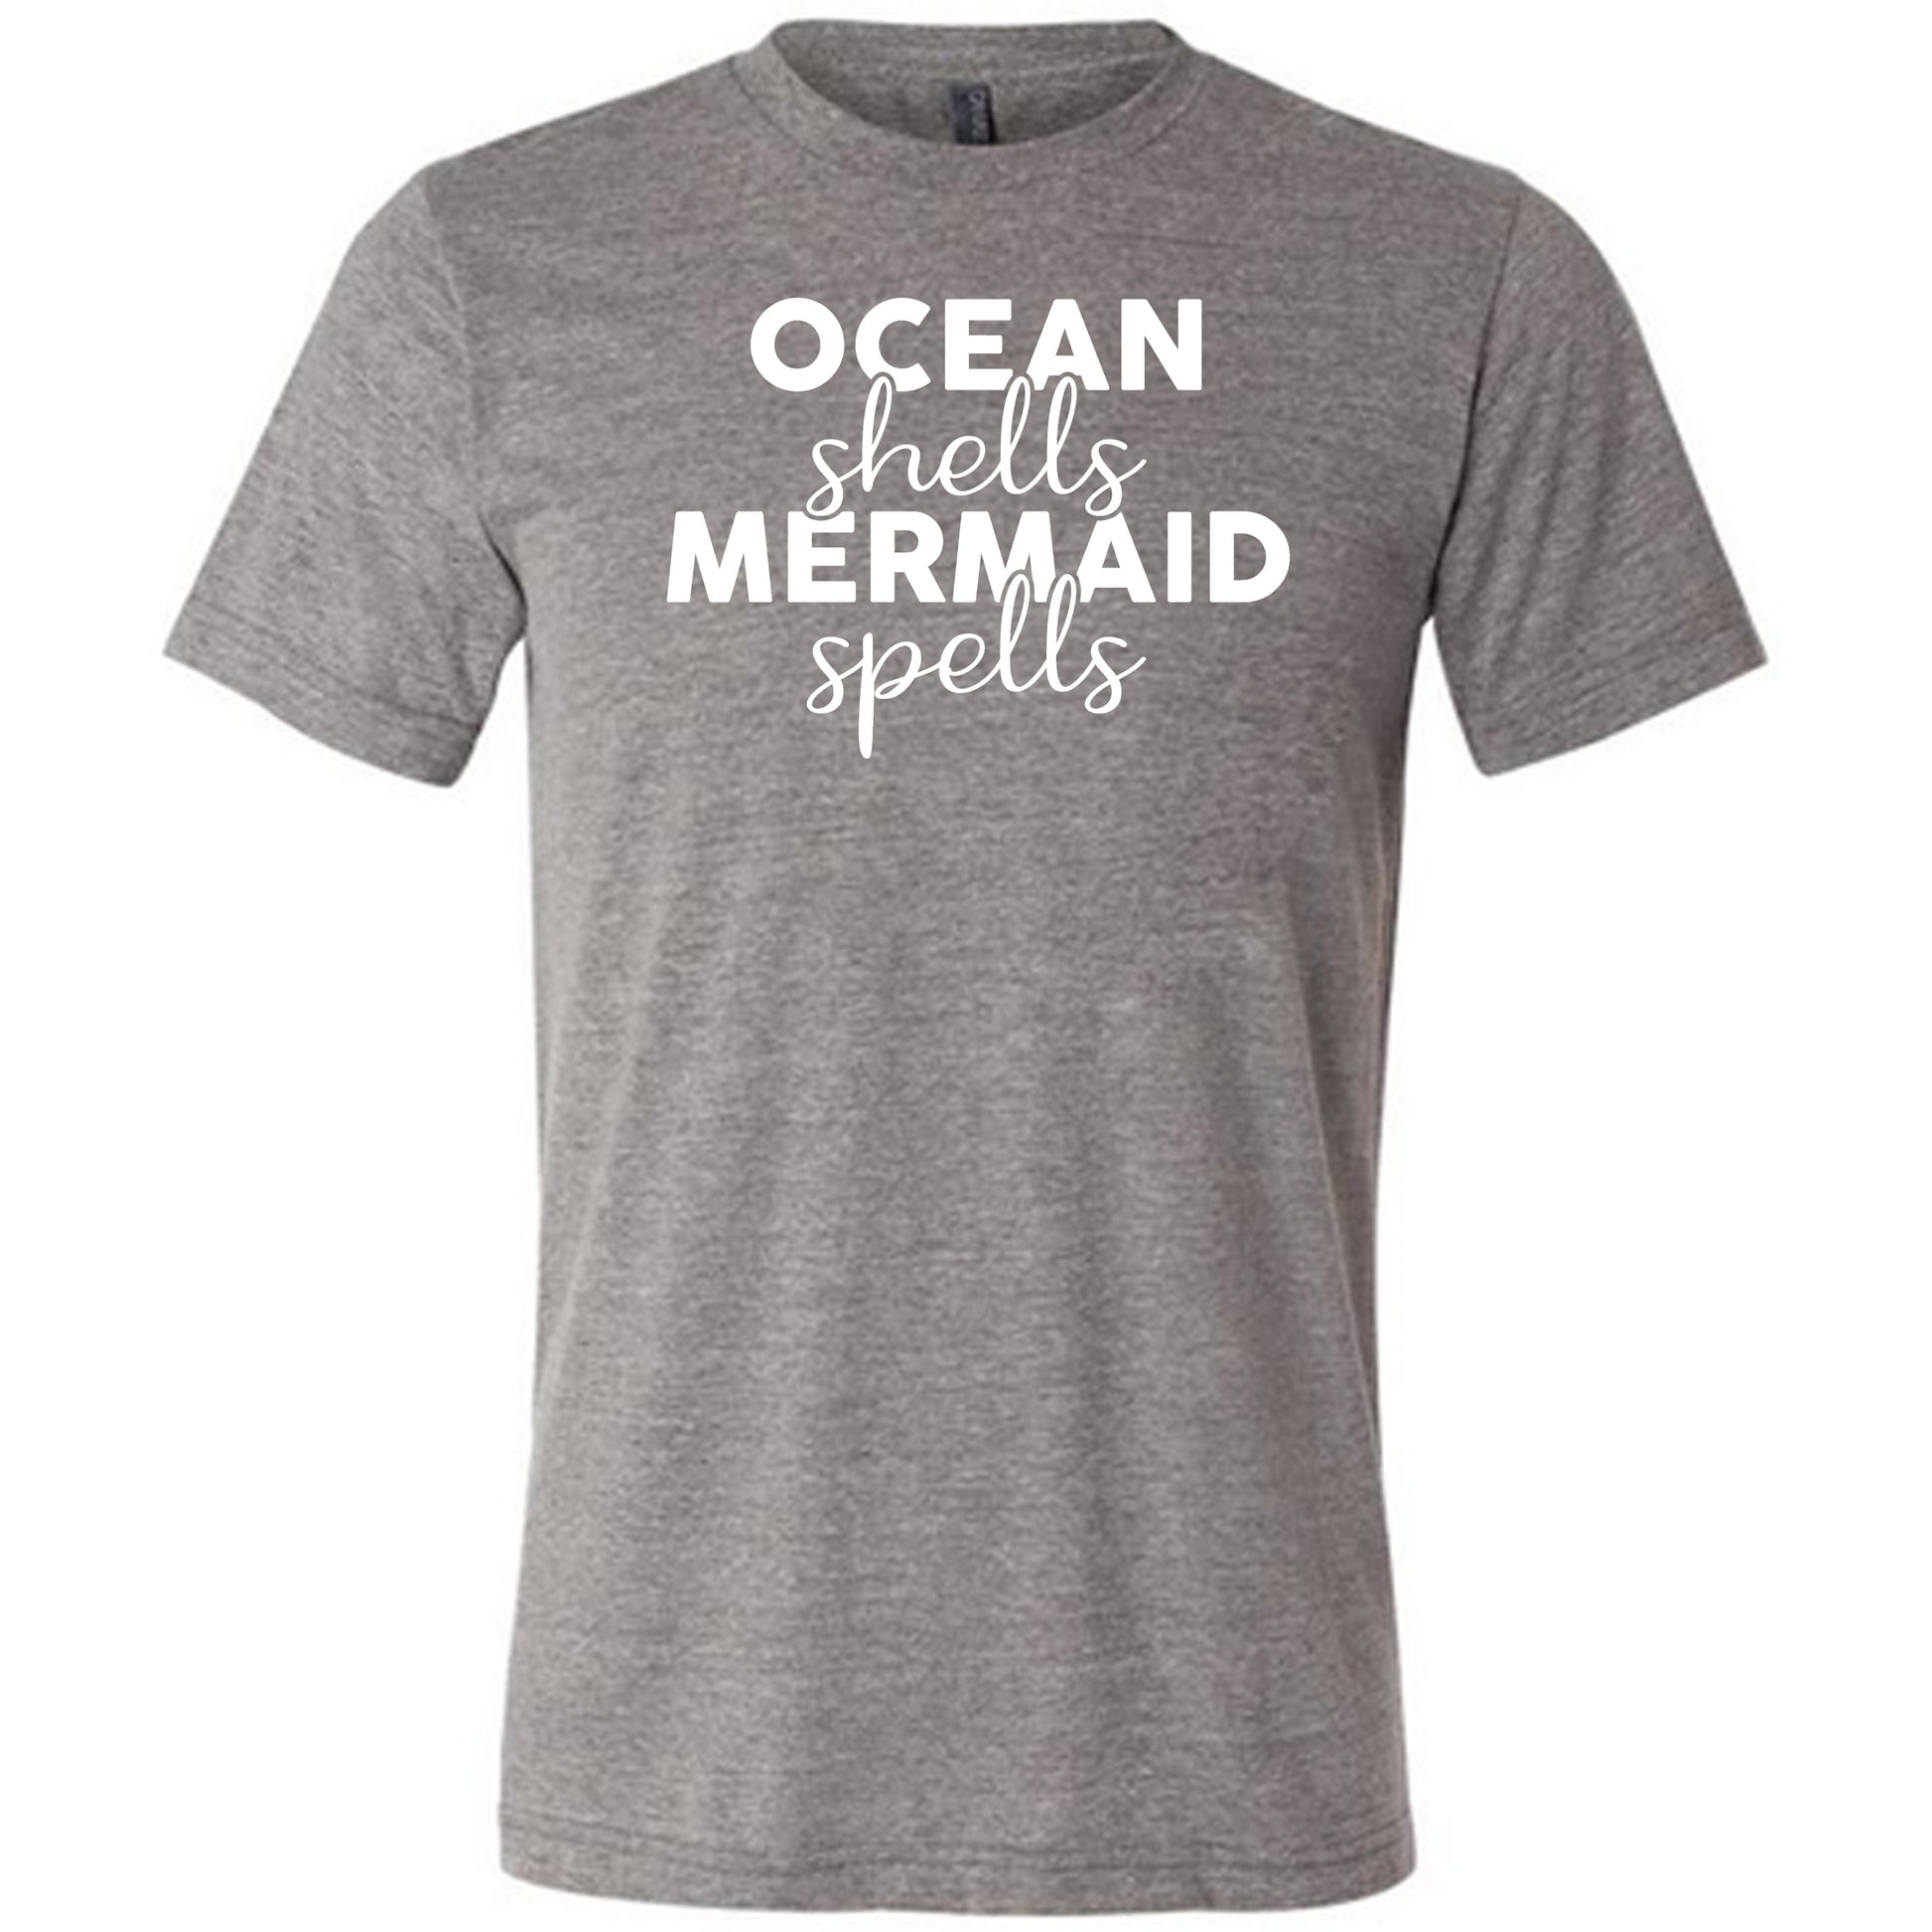 grey unisex tee with the saying "ocean shells mermaid spells" in white in the center